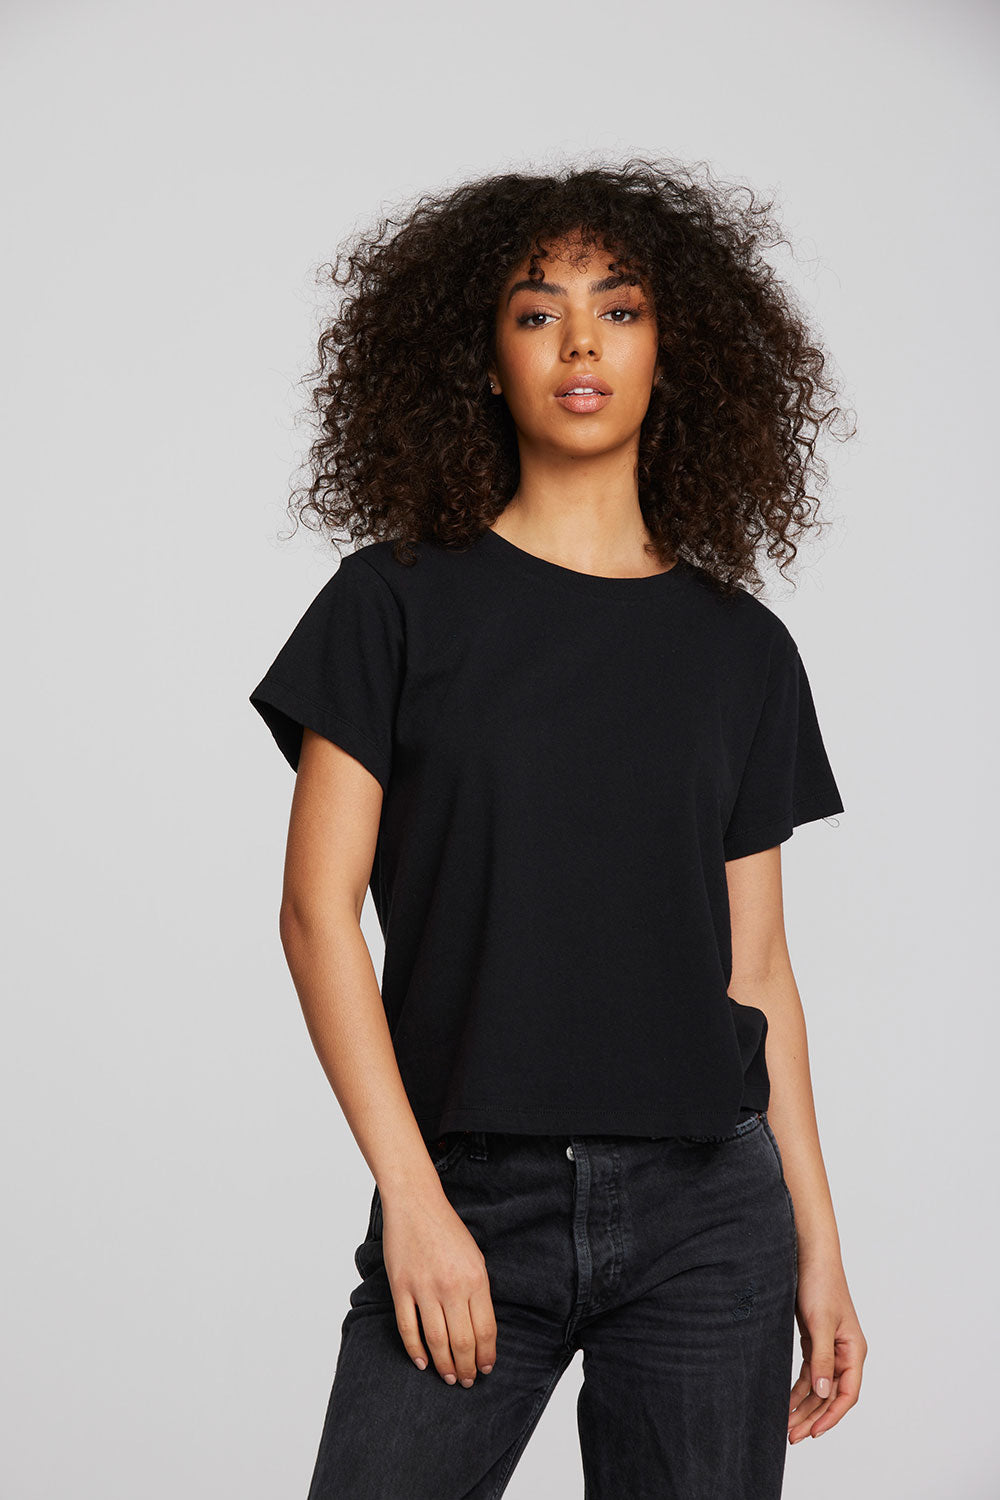 Coast Cotton Jersey Oversized Crew Neck Tee Womens chaserbrand